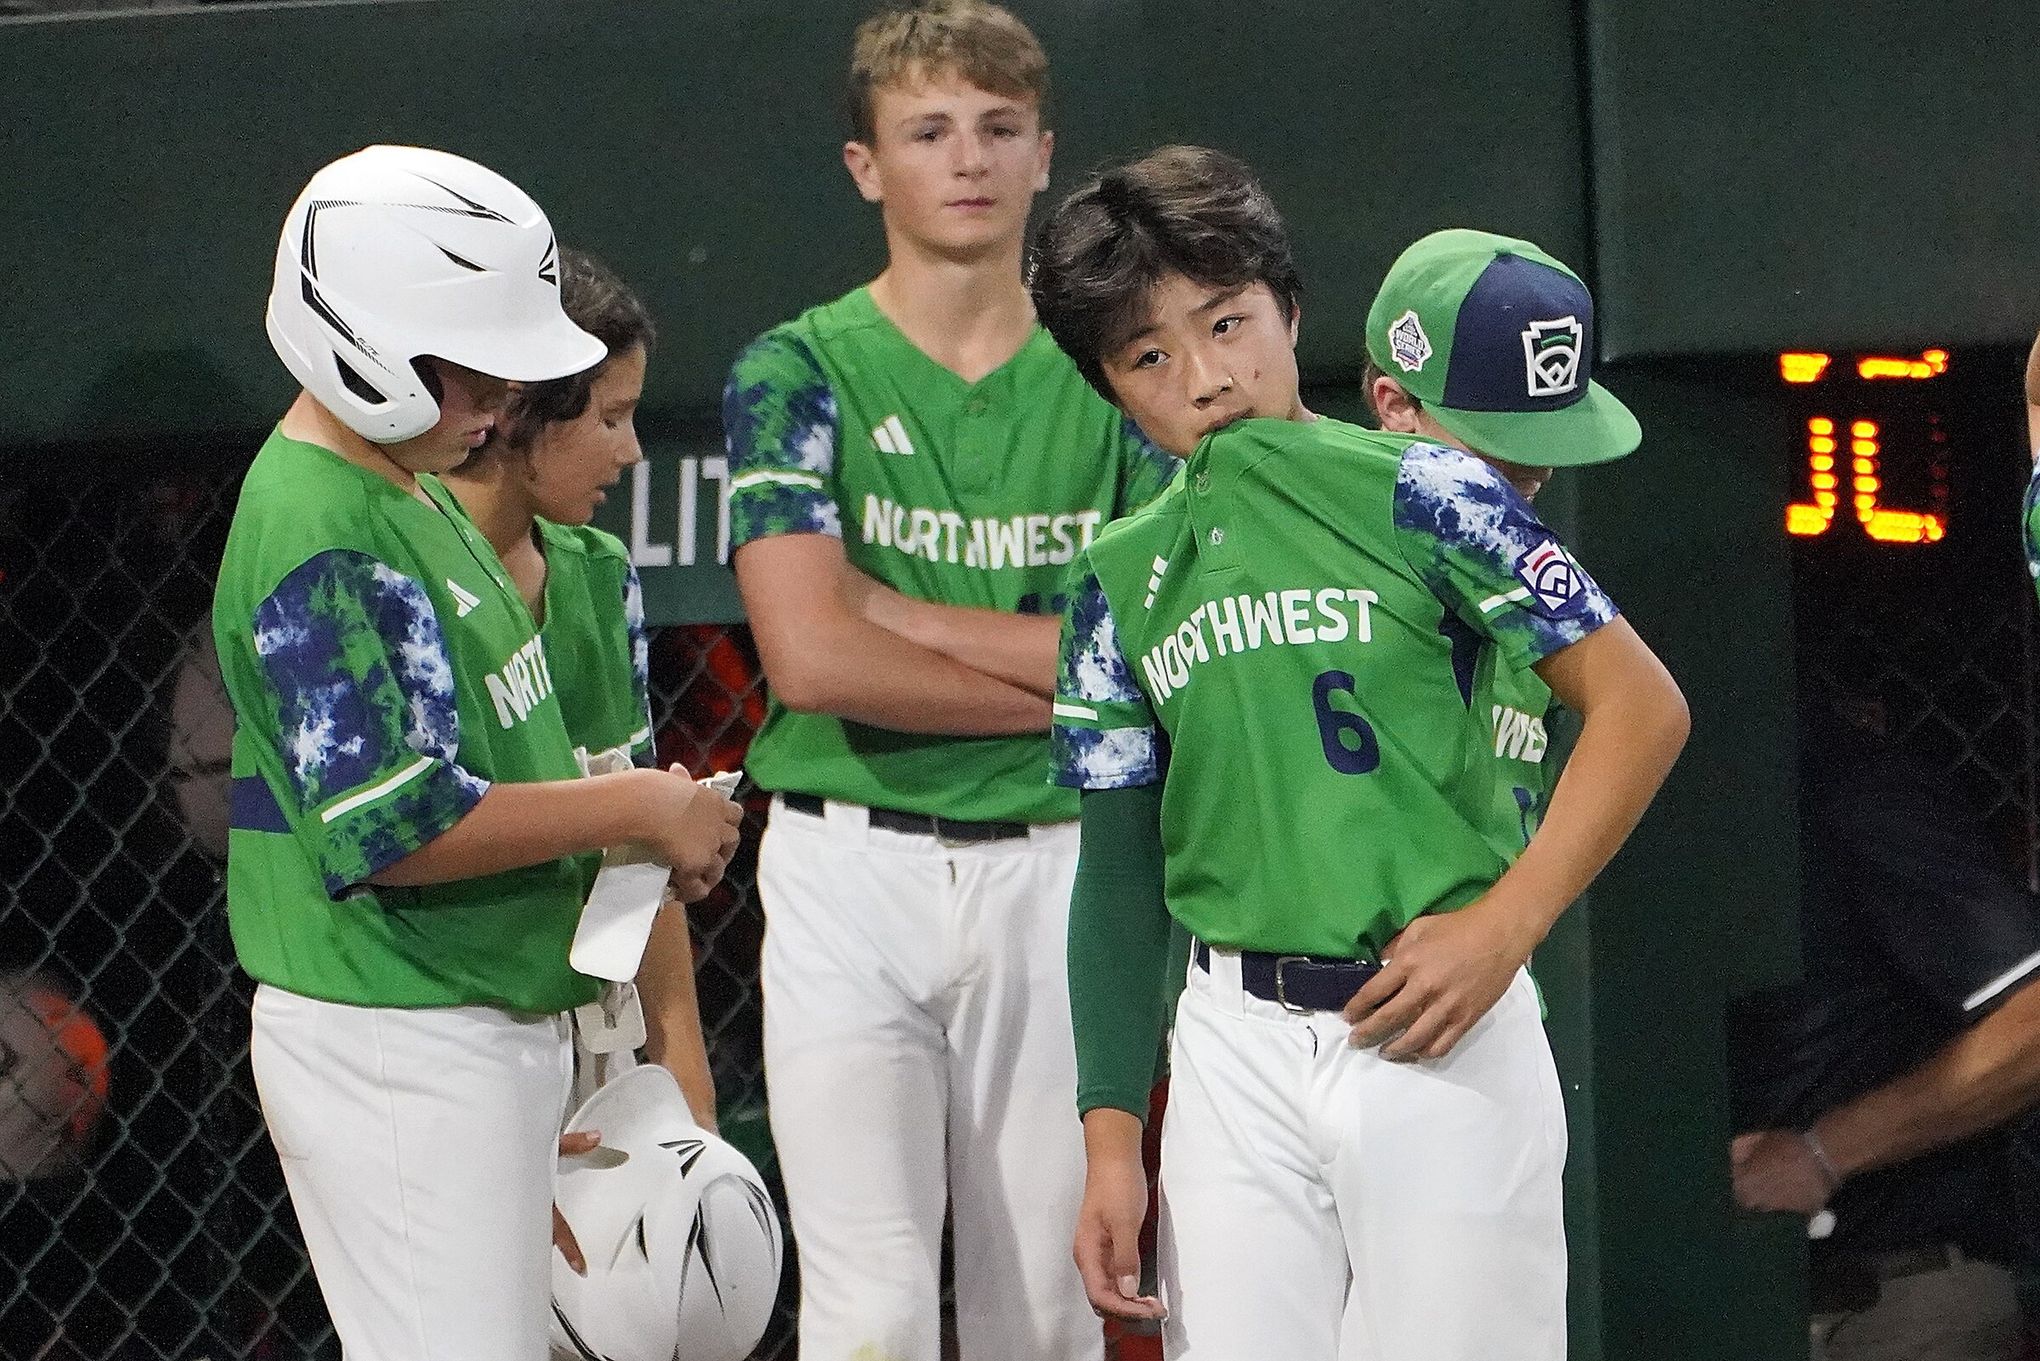 Northeast Seattle loses thriller to Texas in Little League World Series